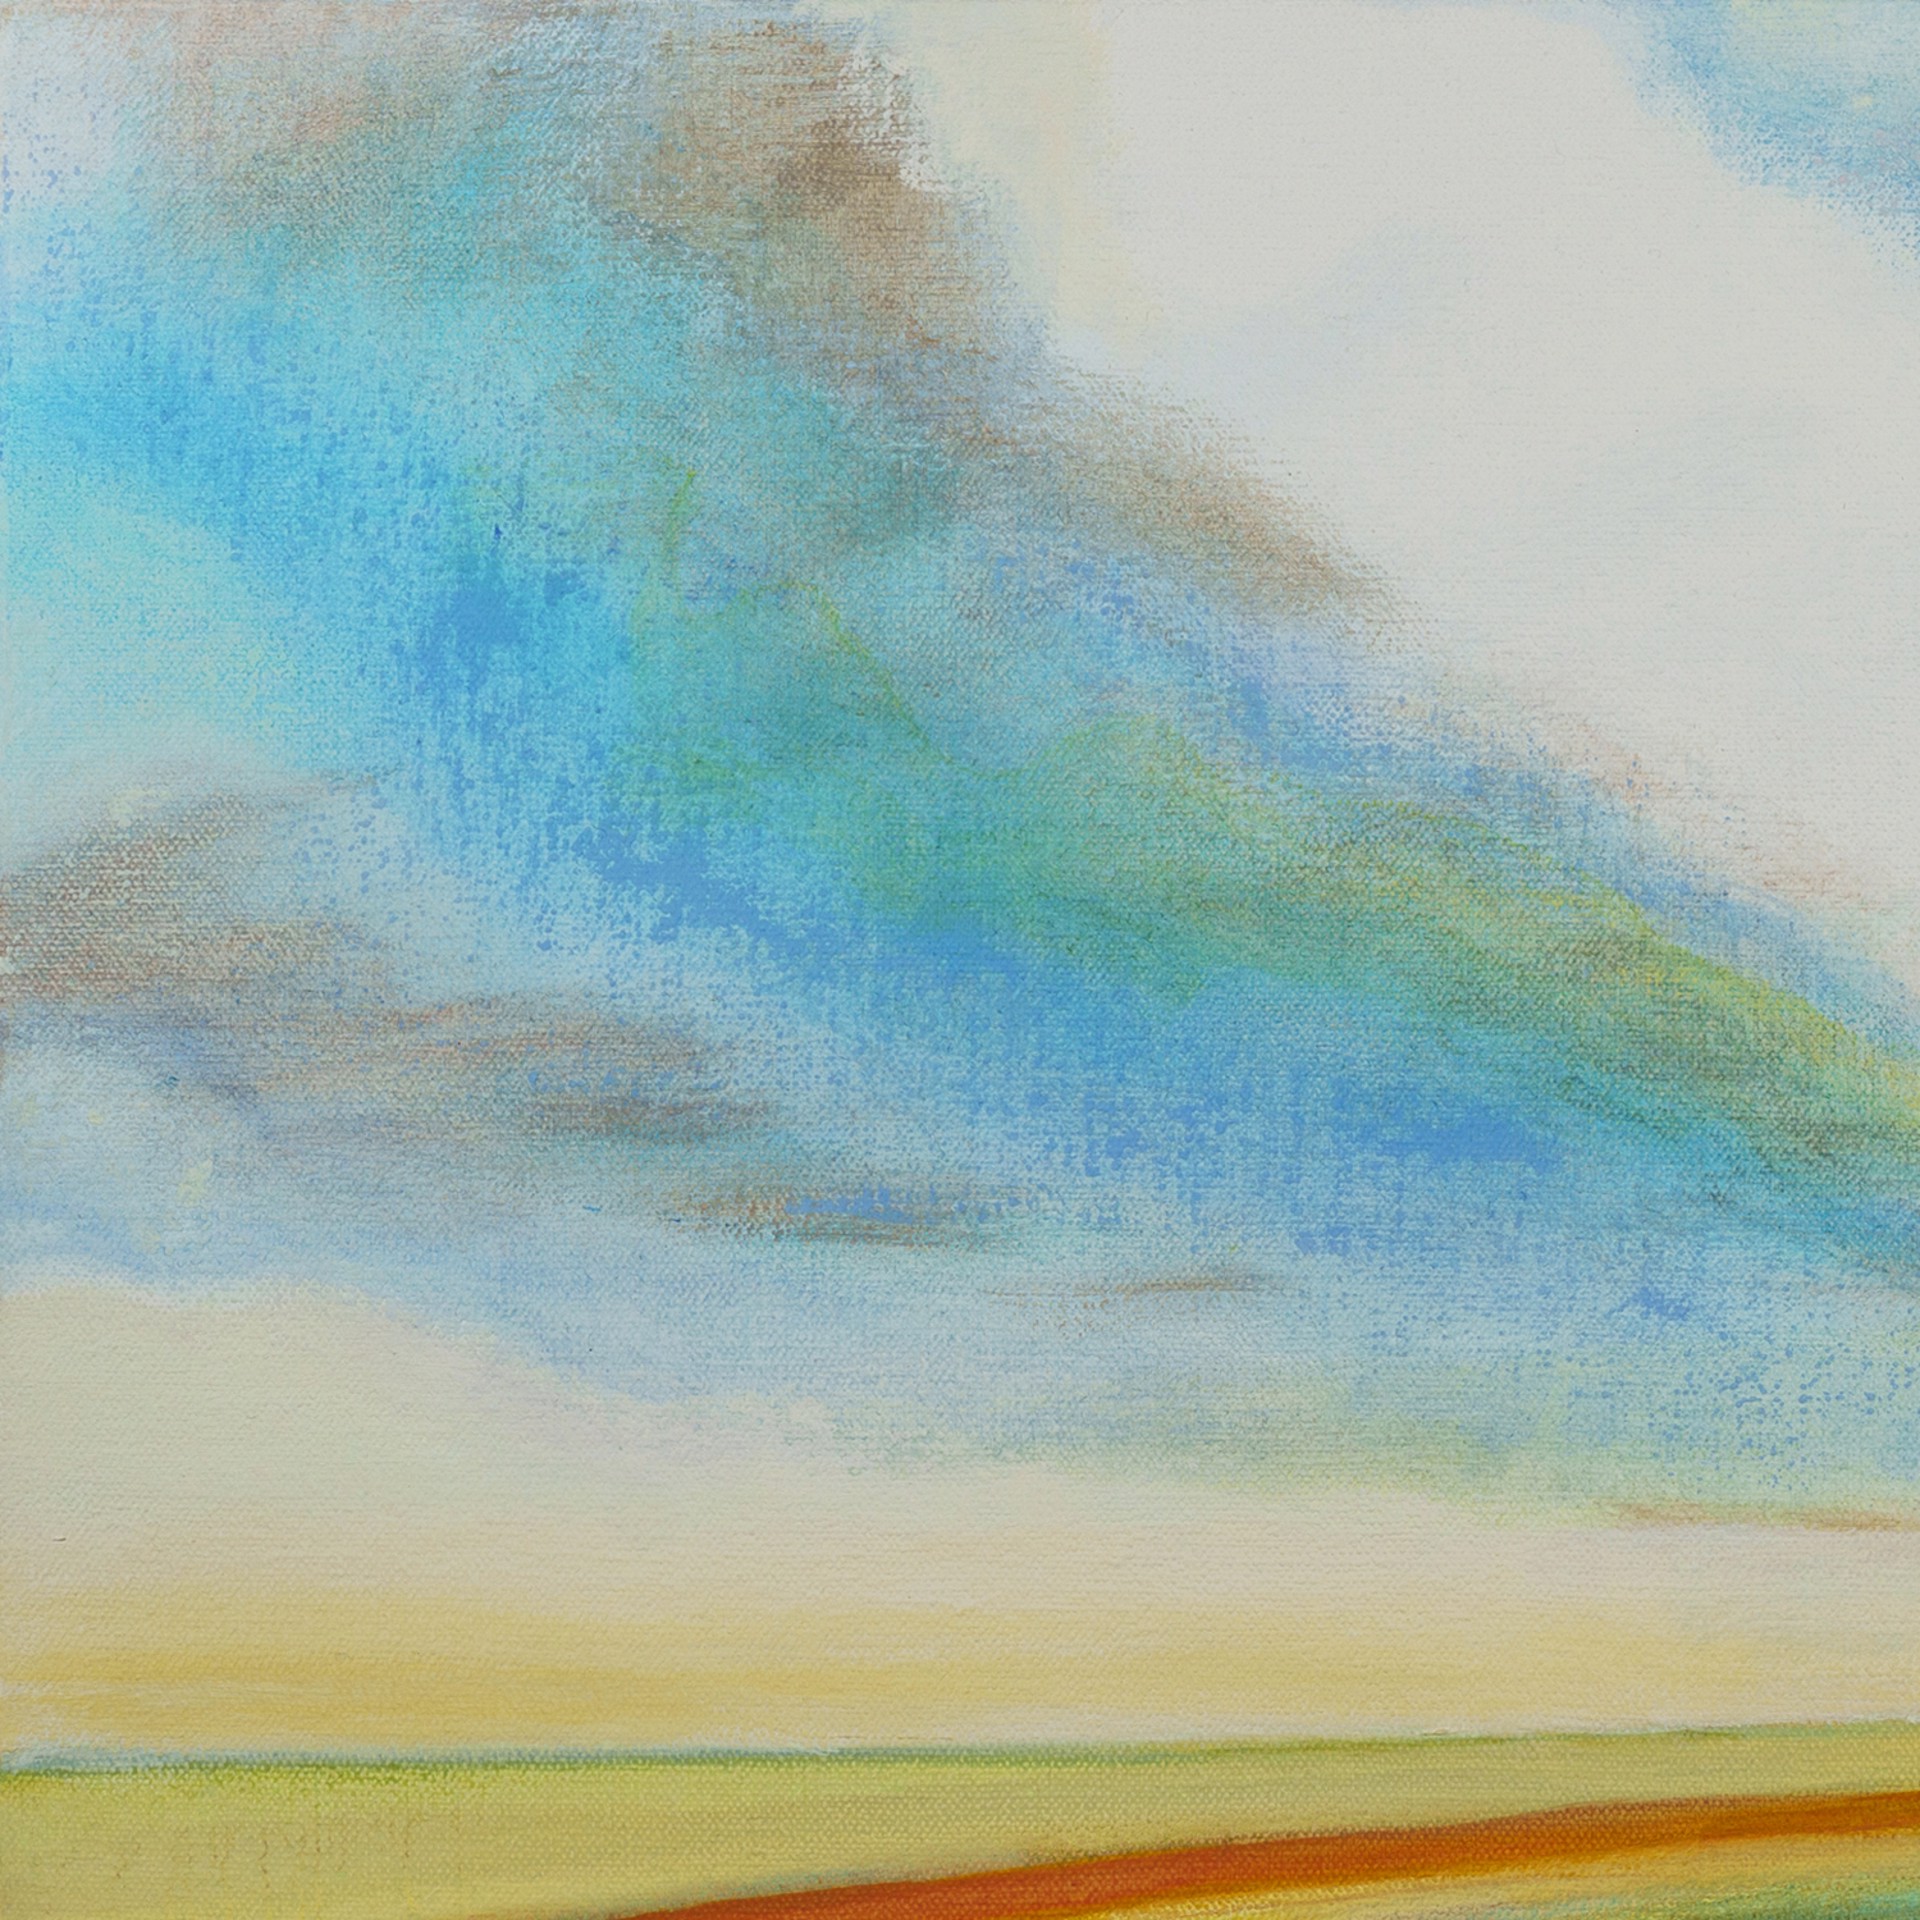 Land and Sky by Susan Maakestad